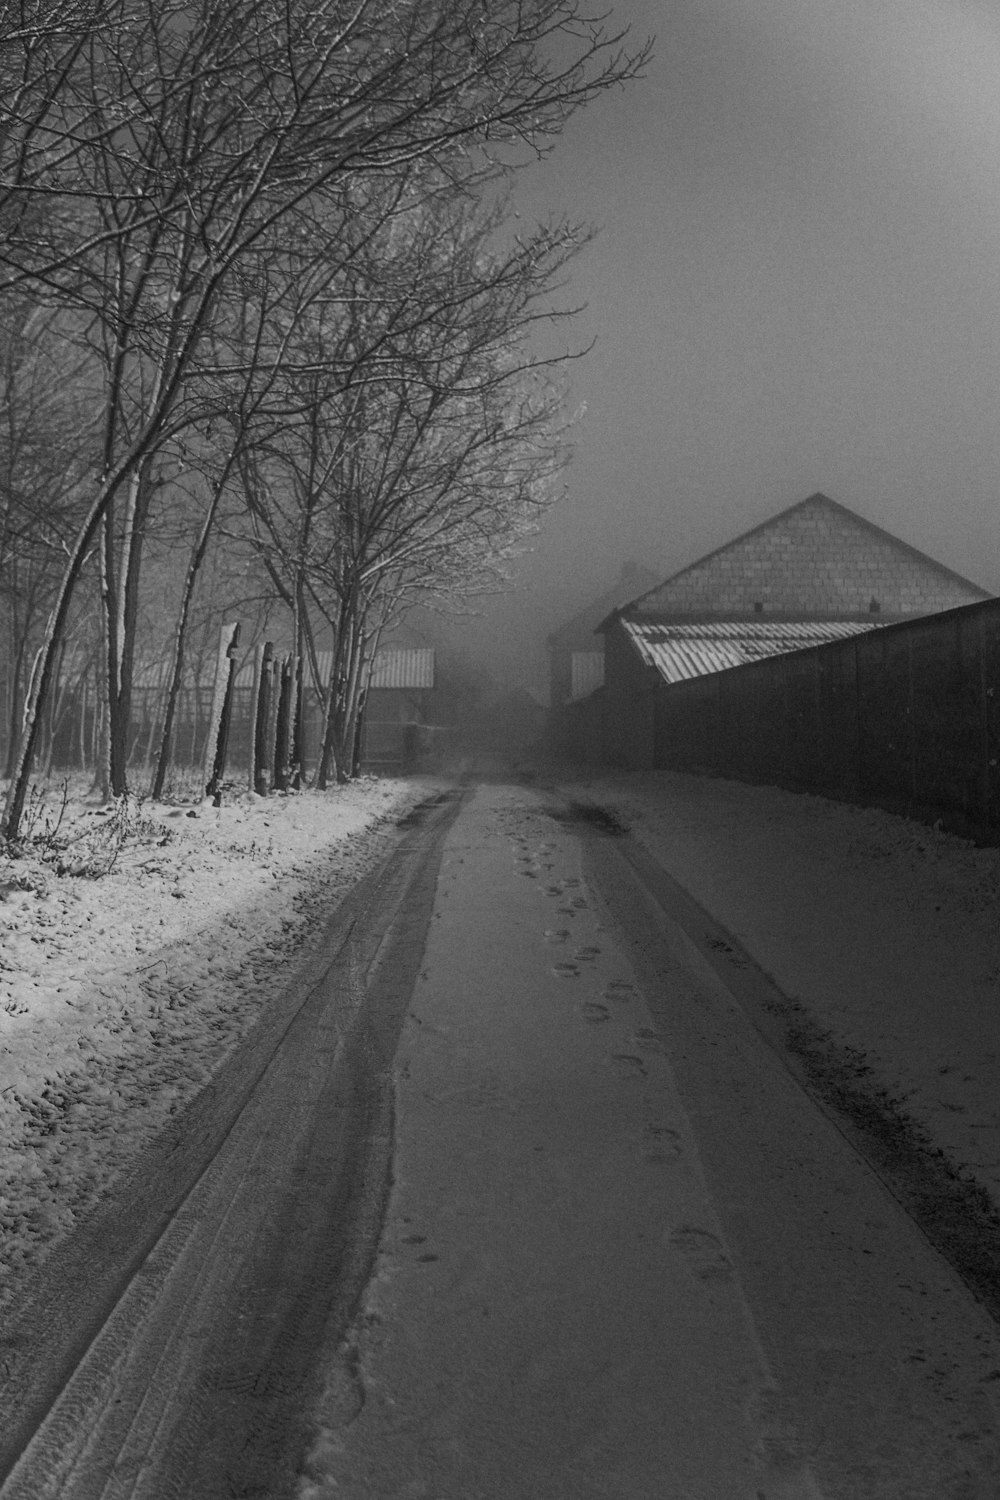 a black and white photo of a snowy road